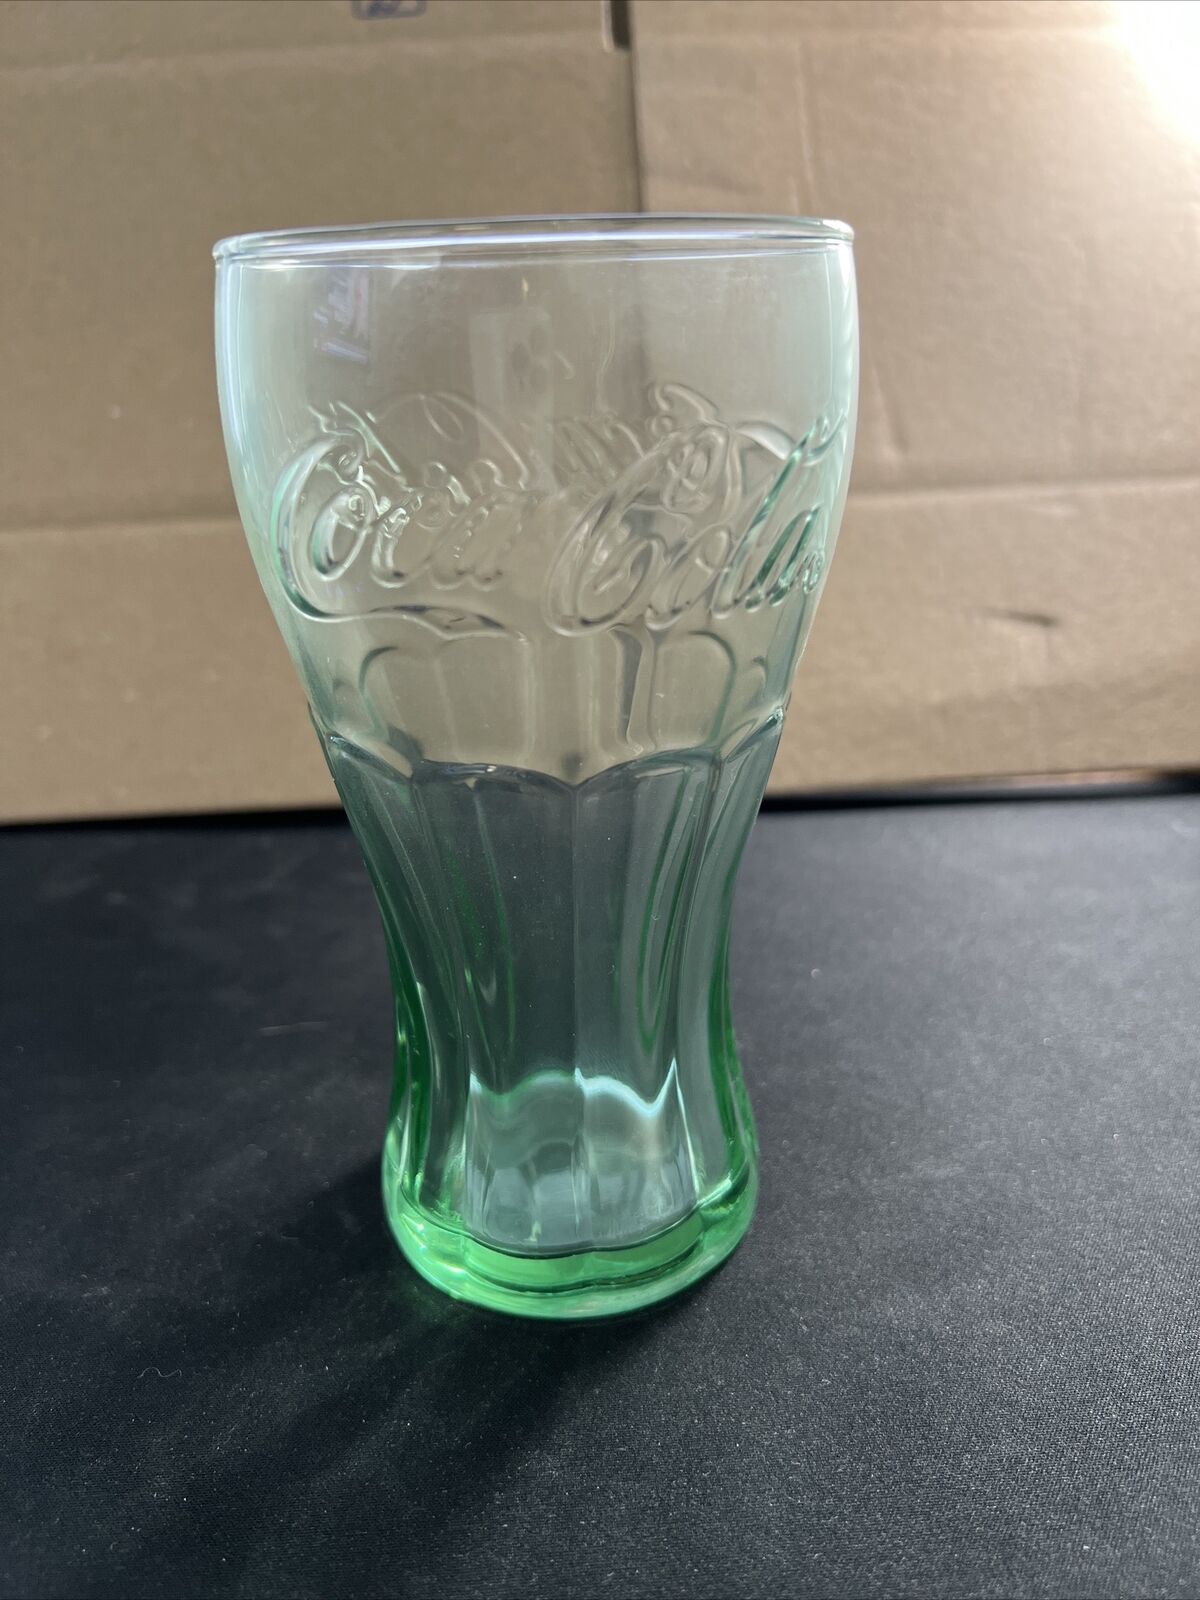 Coke Glass Genuine Coca-Cola Green Large  Tall Glass Cup Vintage Style 